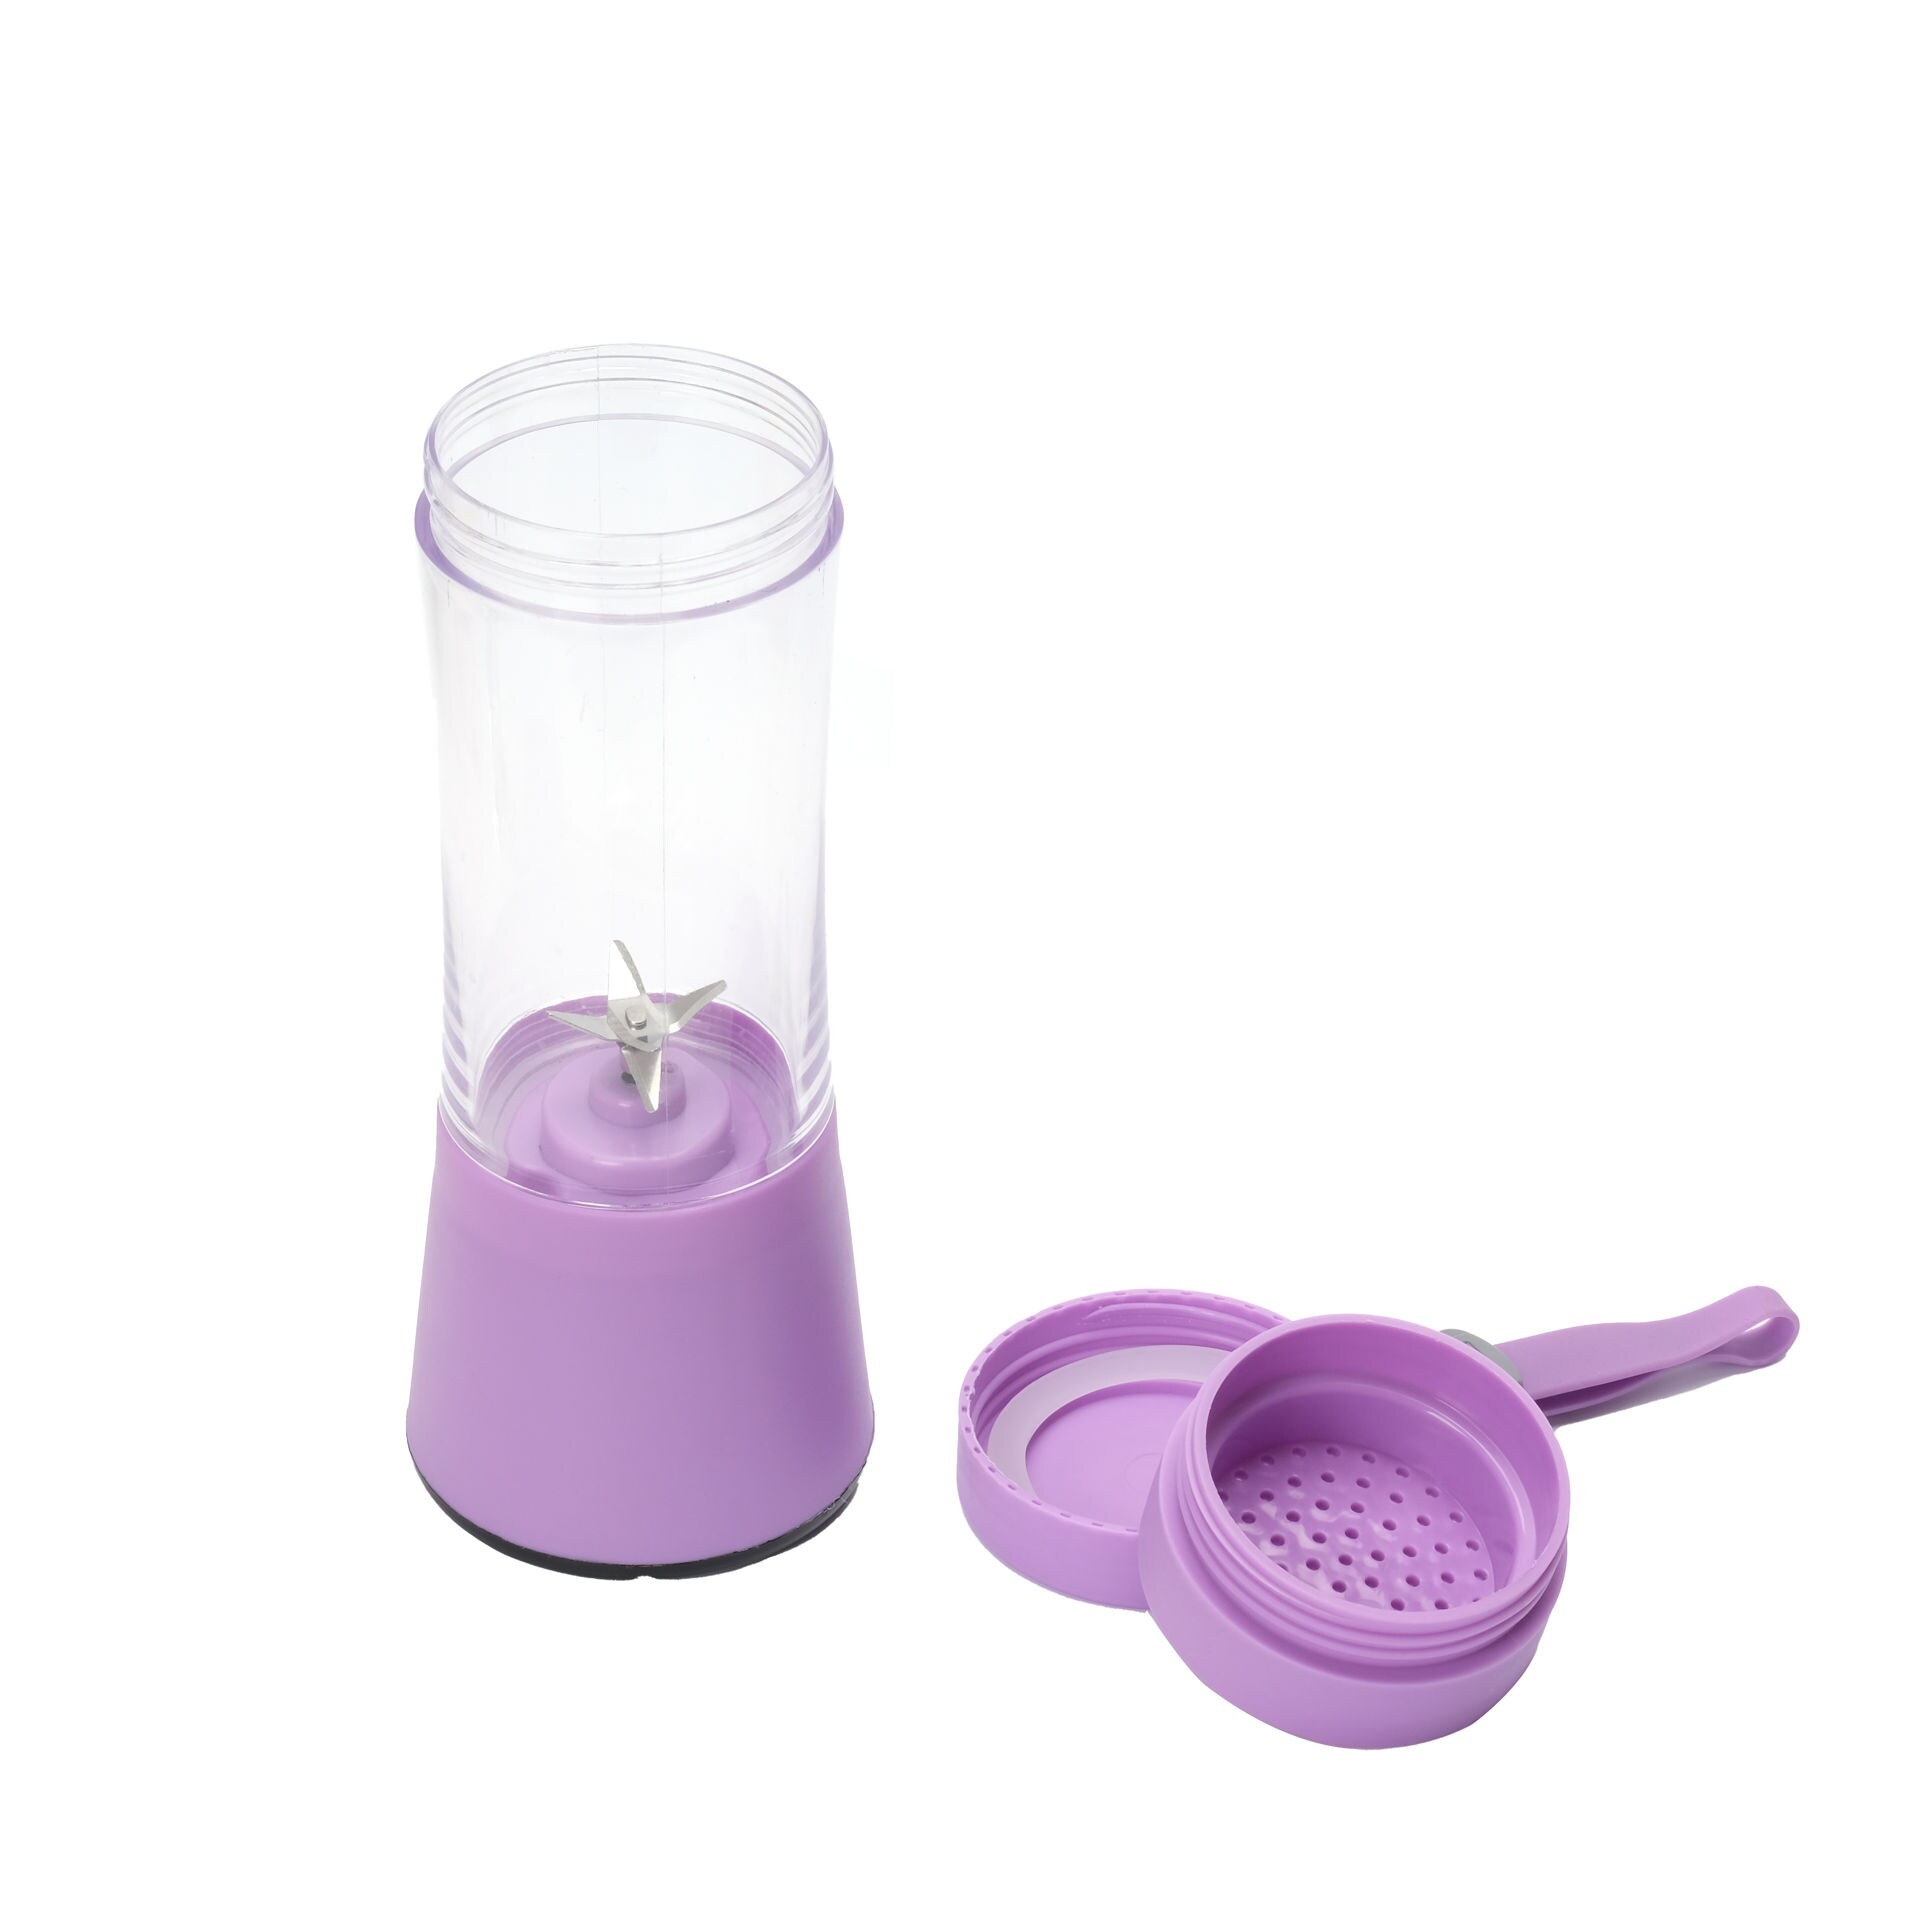 https://assets.dragonmart.ae//pictures/0632764_portable-rechargeable-battery-juice-blender-380-ml-purple.jpeg